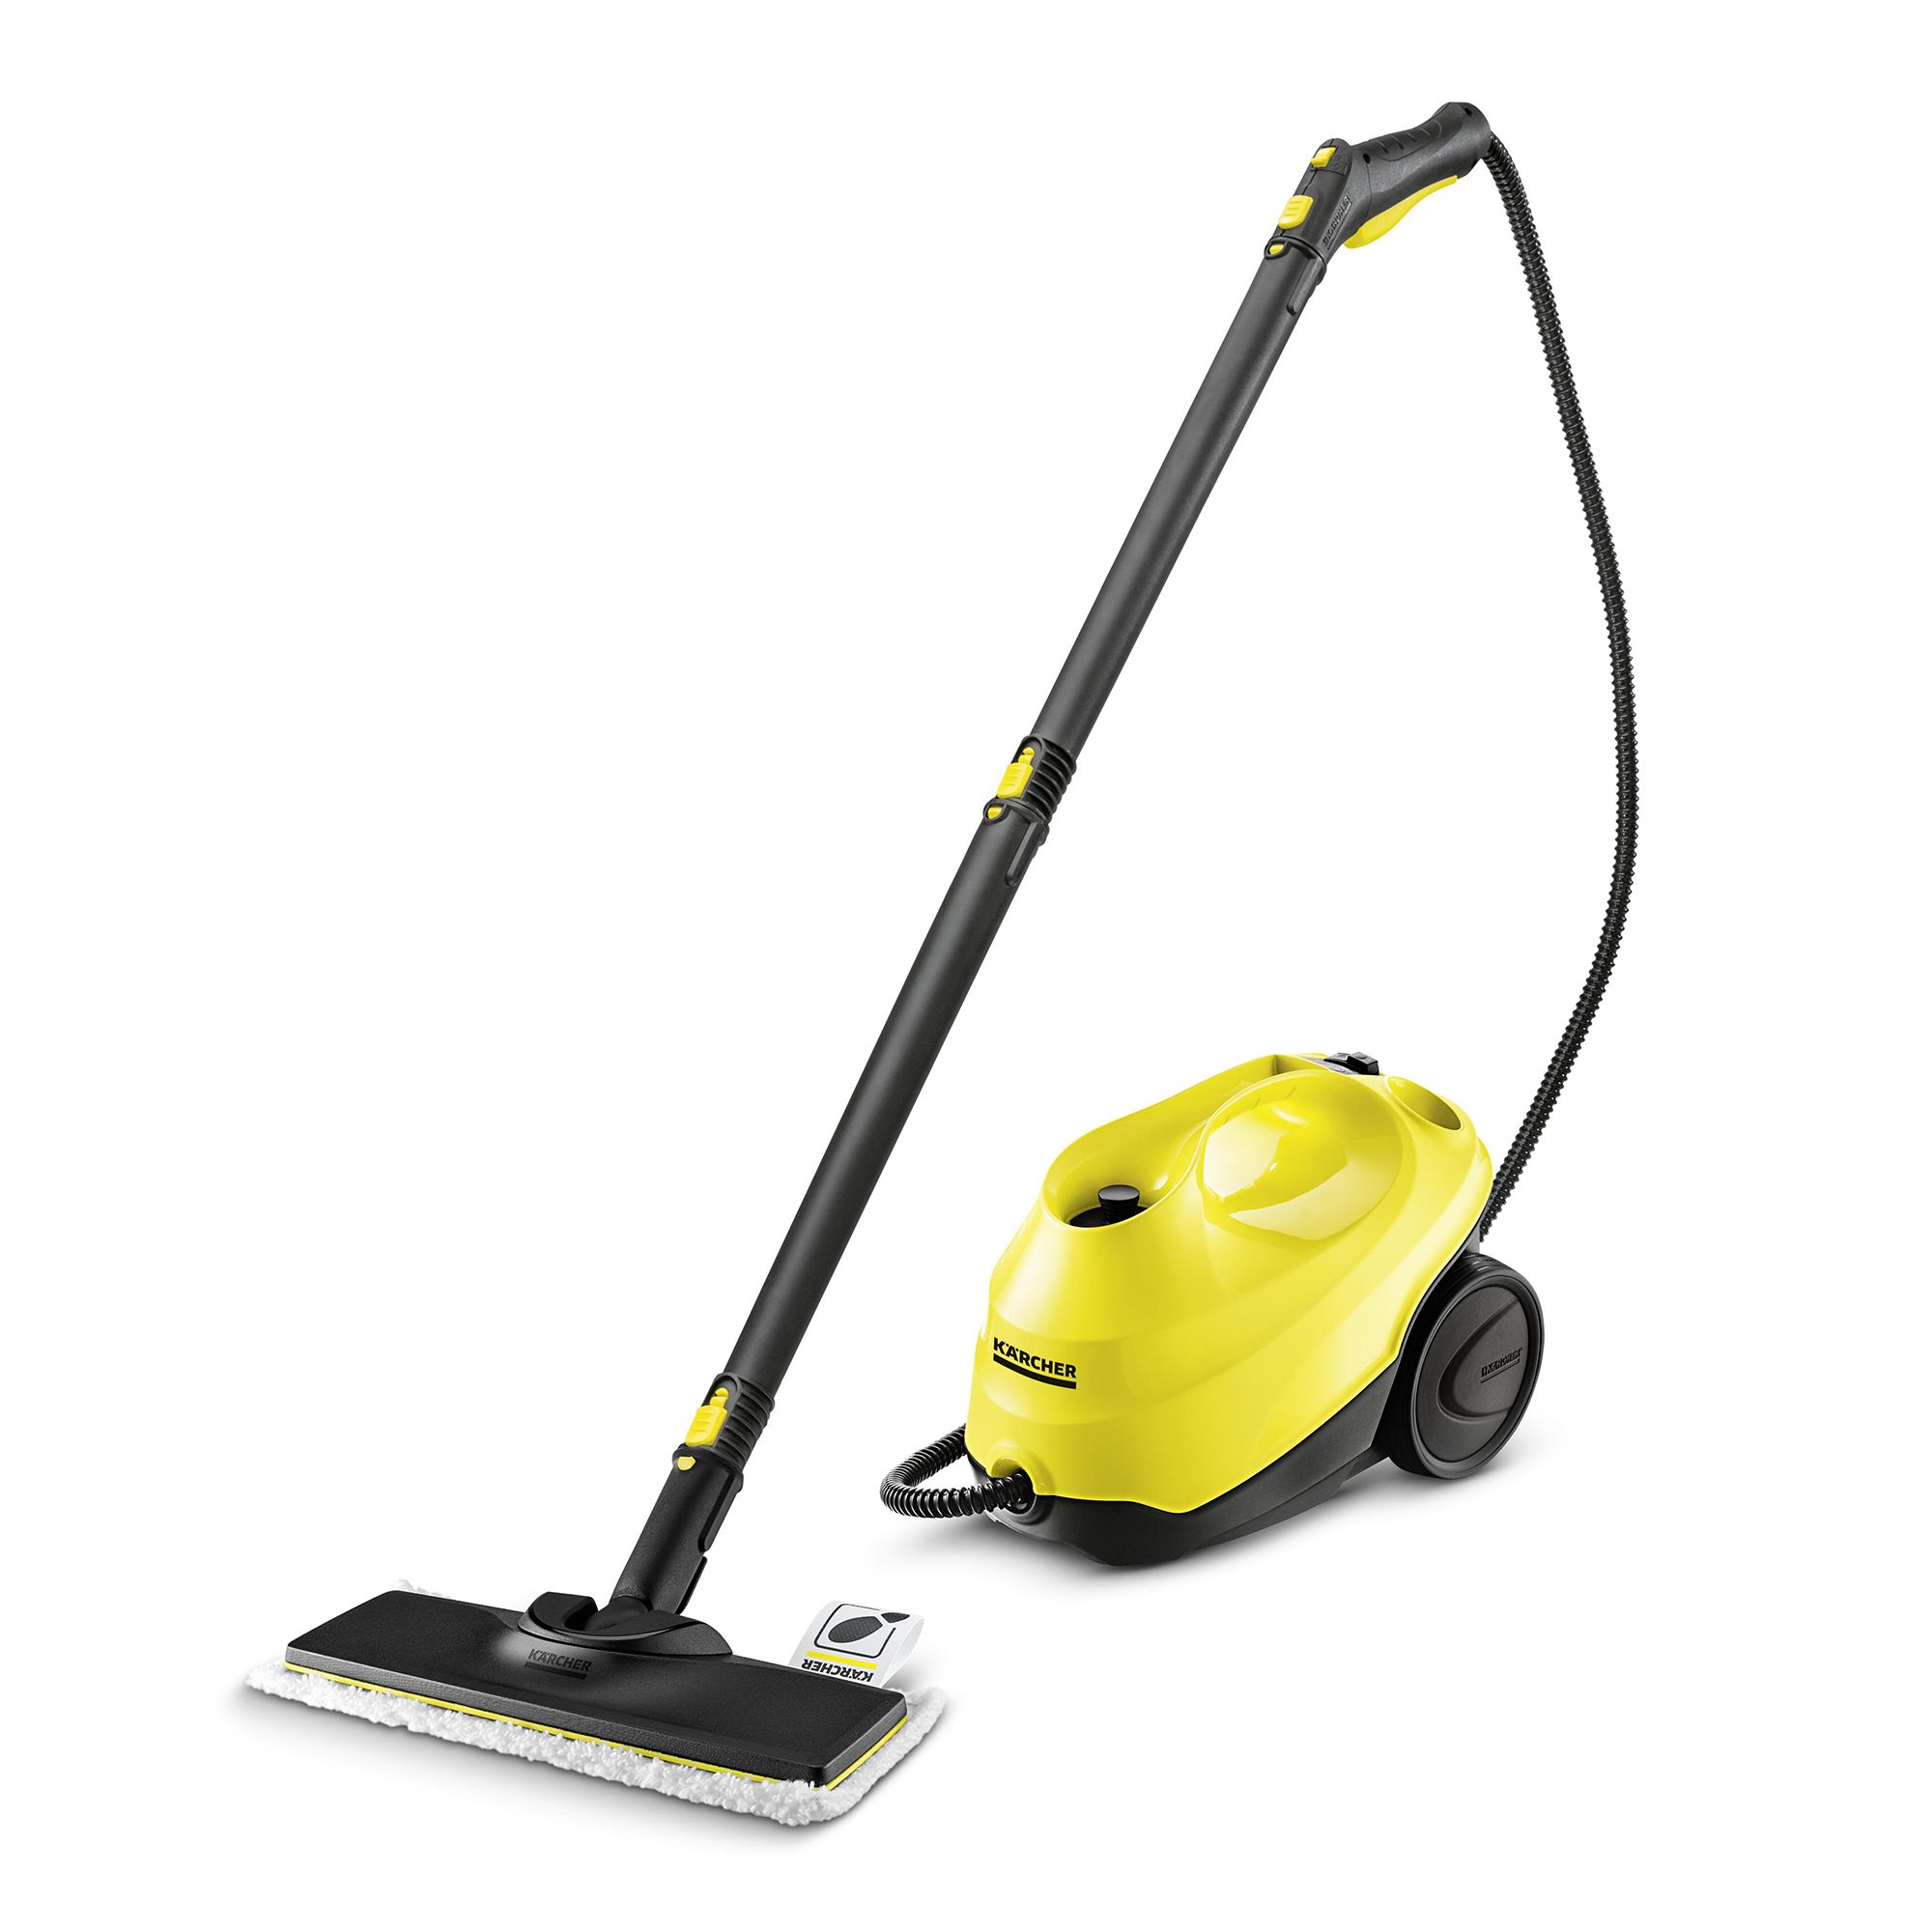 Kärcher SC 3 easy Fix steam cleaner review: compact, quick and effective